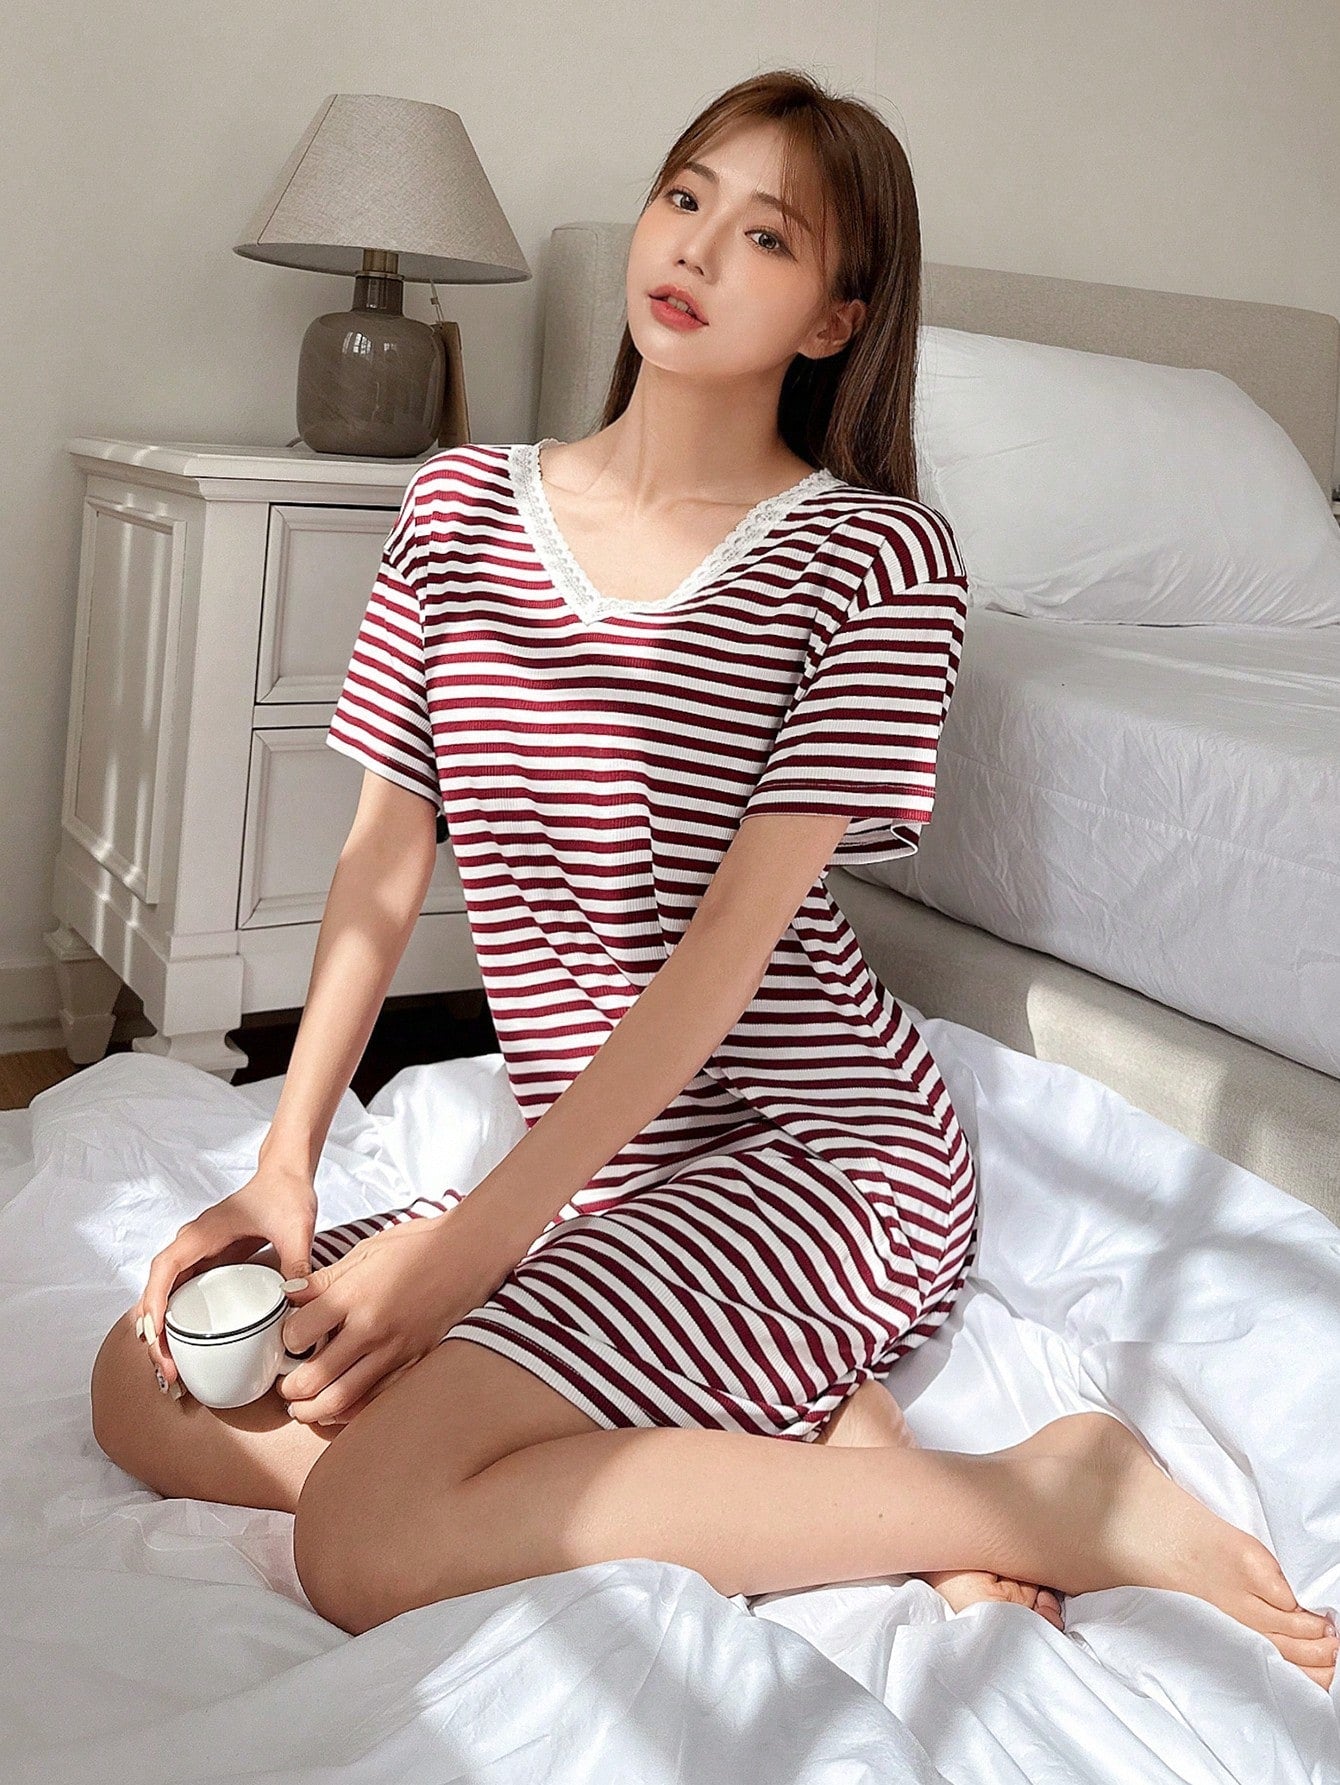 Women Casual Striped V-Neck Lace Trimmed Nightgown Dress